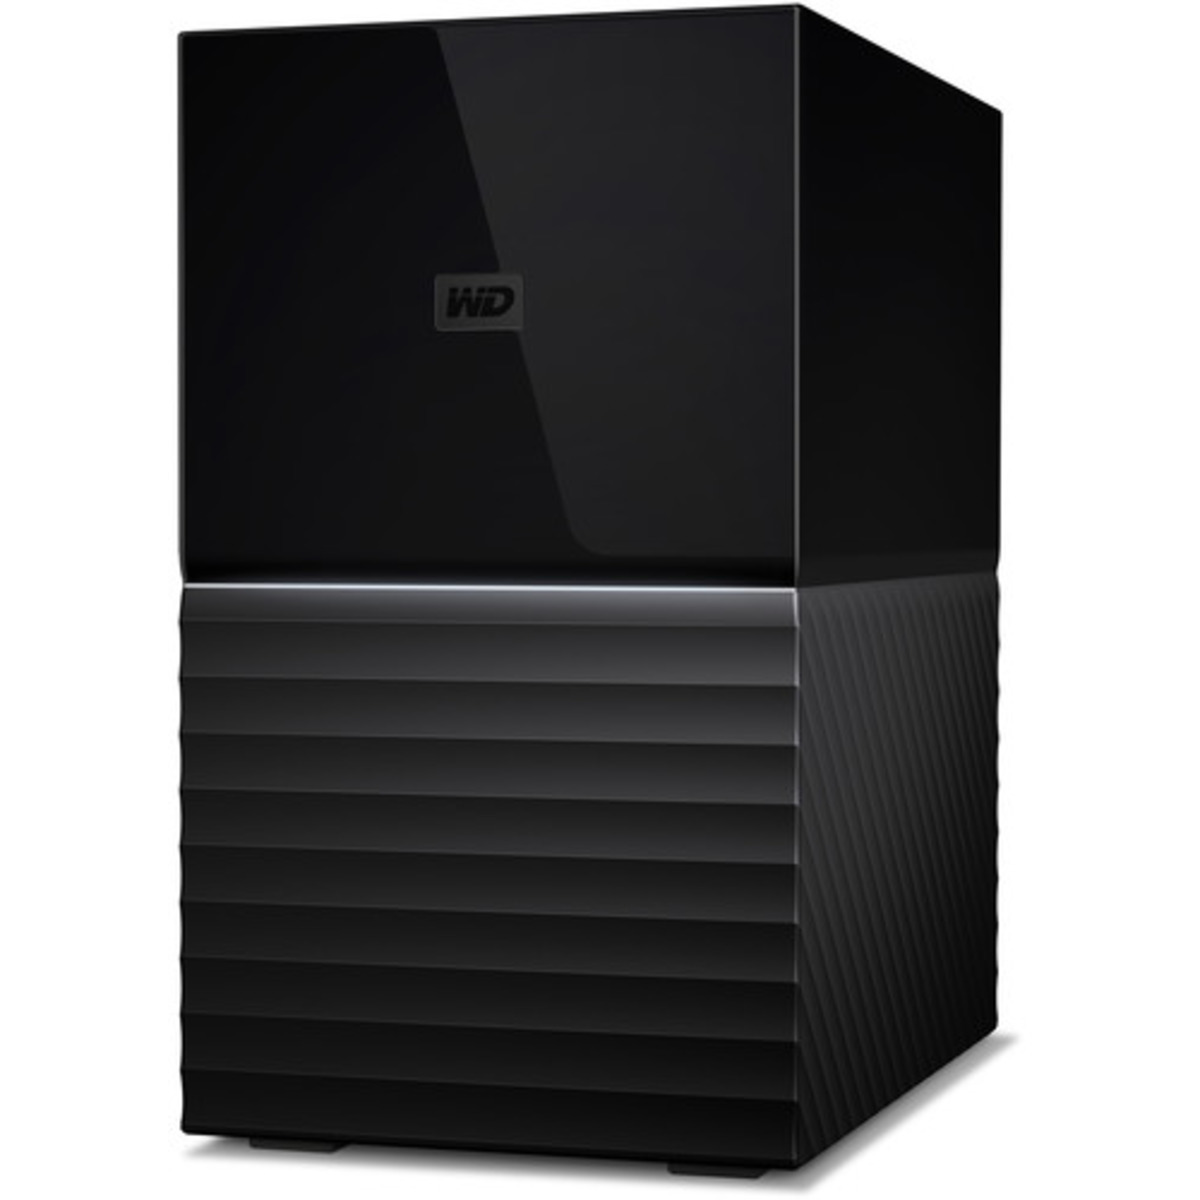 buy $557 Western Digital My Book DUO Gen 2 8tb Desktop DAS - Direct Attached Storage Device 2x4000gb Western Digital Ultrastar DC HC310 HUS726T4TALE6L4 3.5 7200rpm SATA 6Gb/s HDD ENTERPRISE Class Drives Installed - Burn-In Tested - ON SALE - nas headquarters buy network attached storage server device das new raid-5 free shipping usa christmas new year holiday sale My Book DUO Gen 2